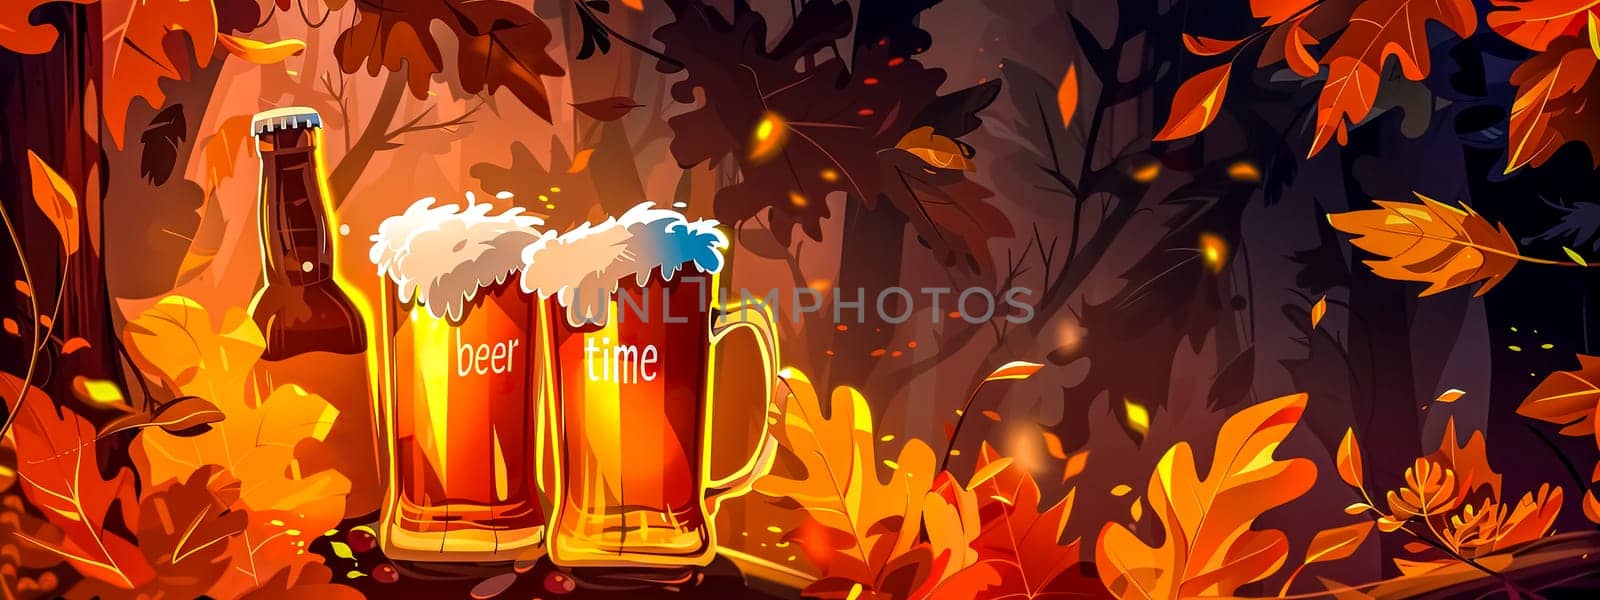 Illustrative banner with beer glasses surrounded by vibrant fall foliage